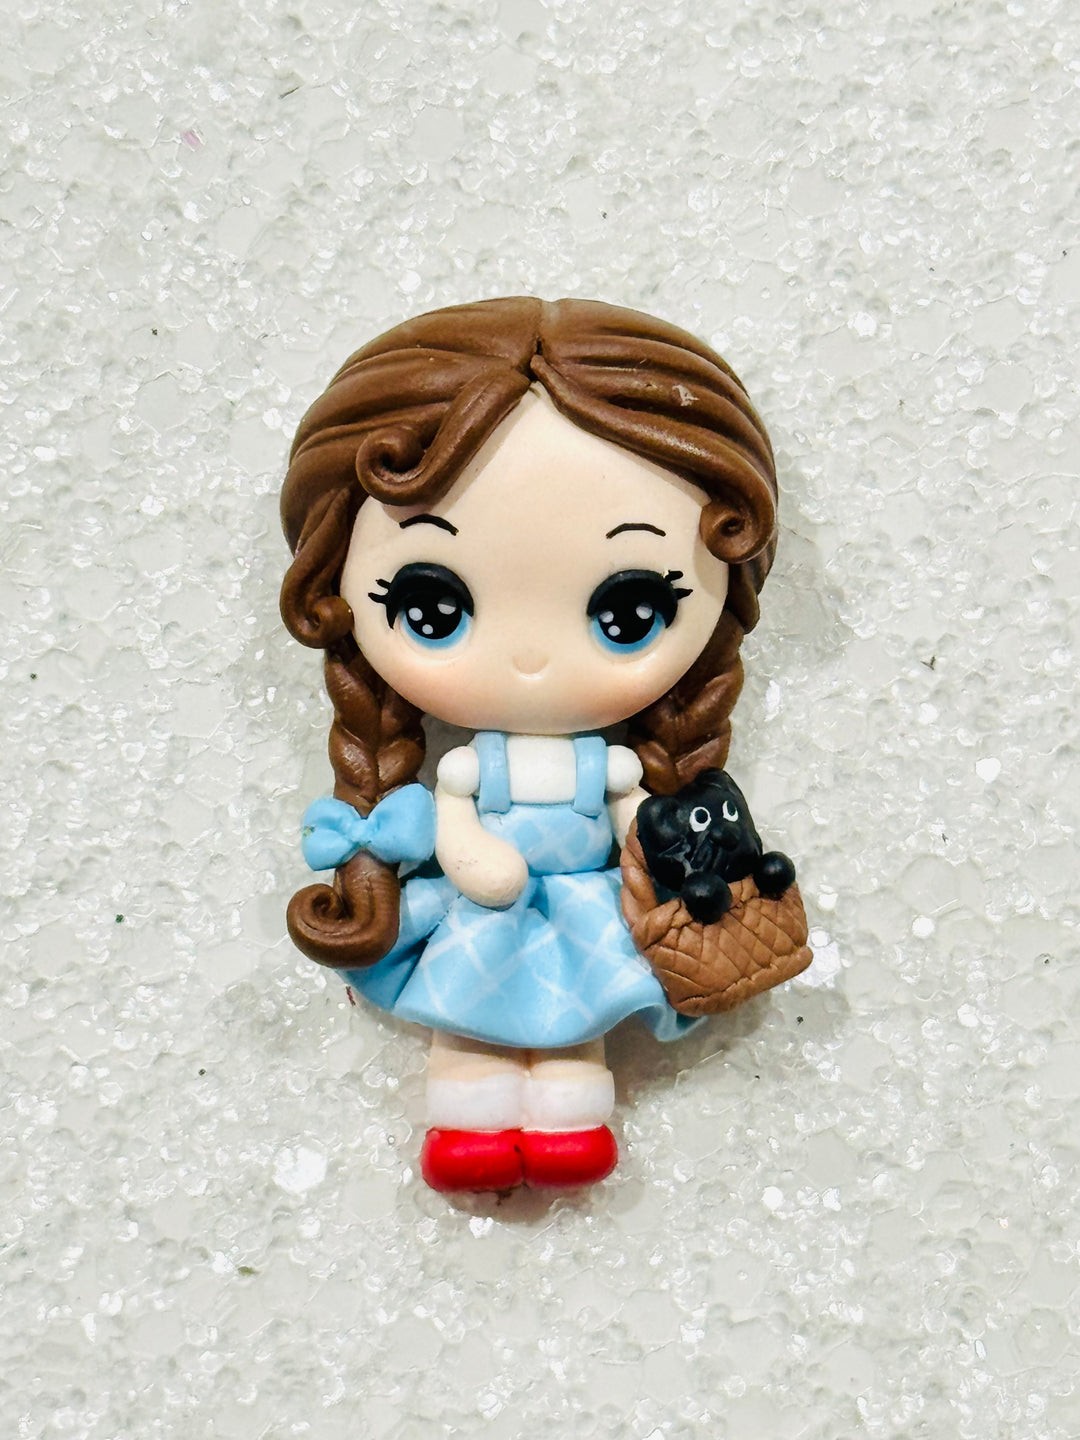 Princess Clays from Temptress Maker